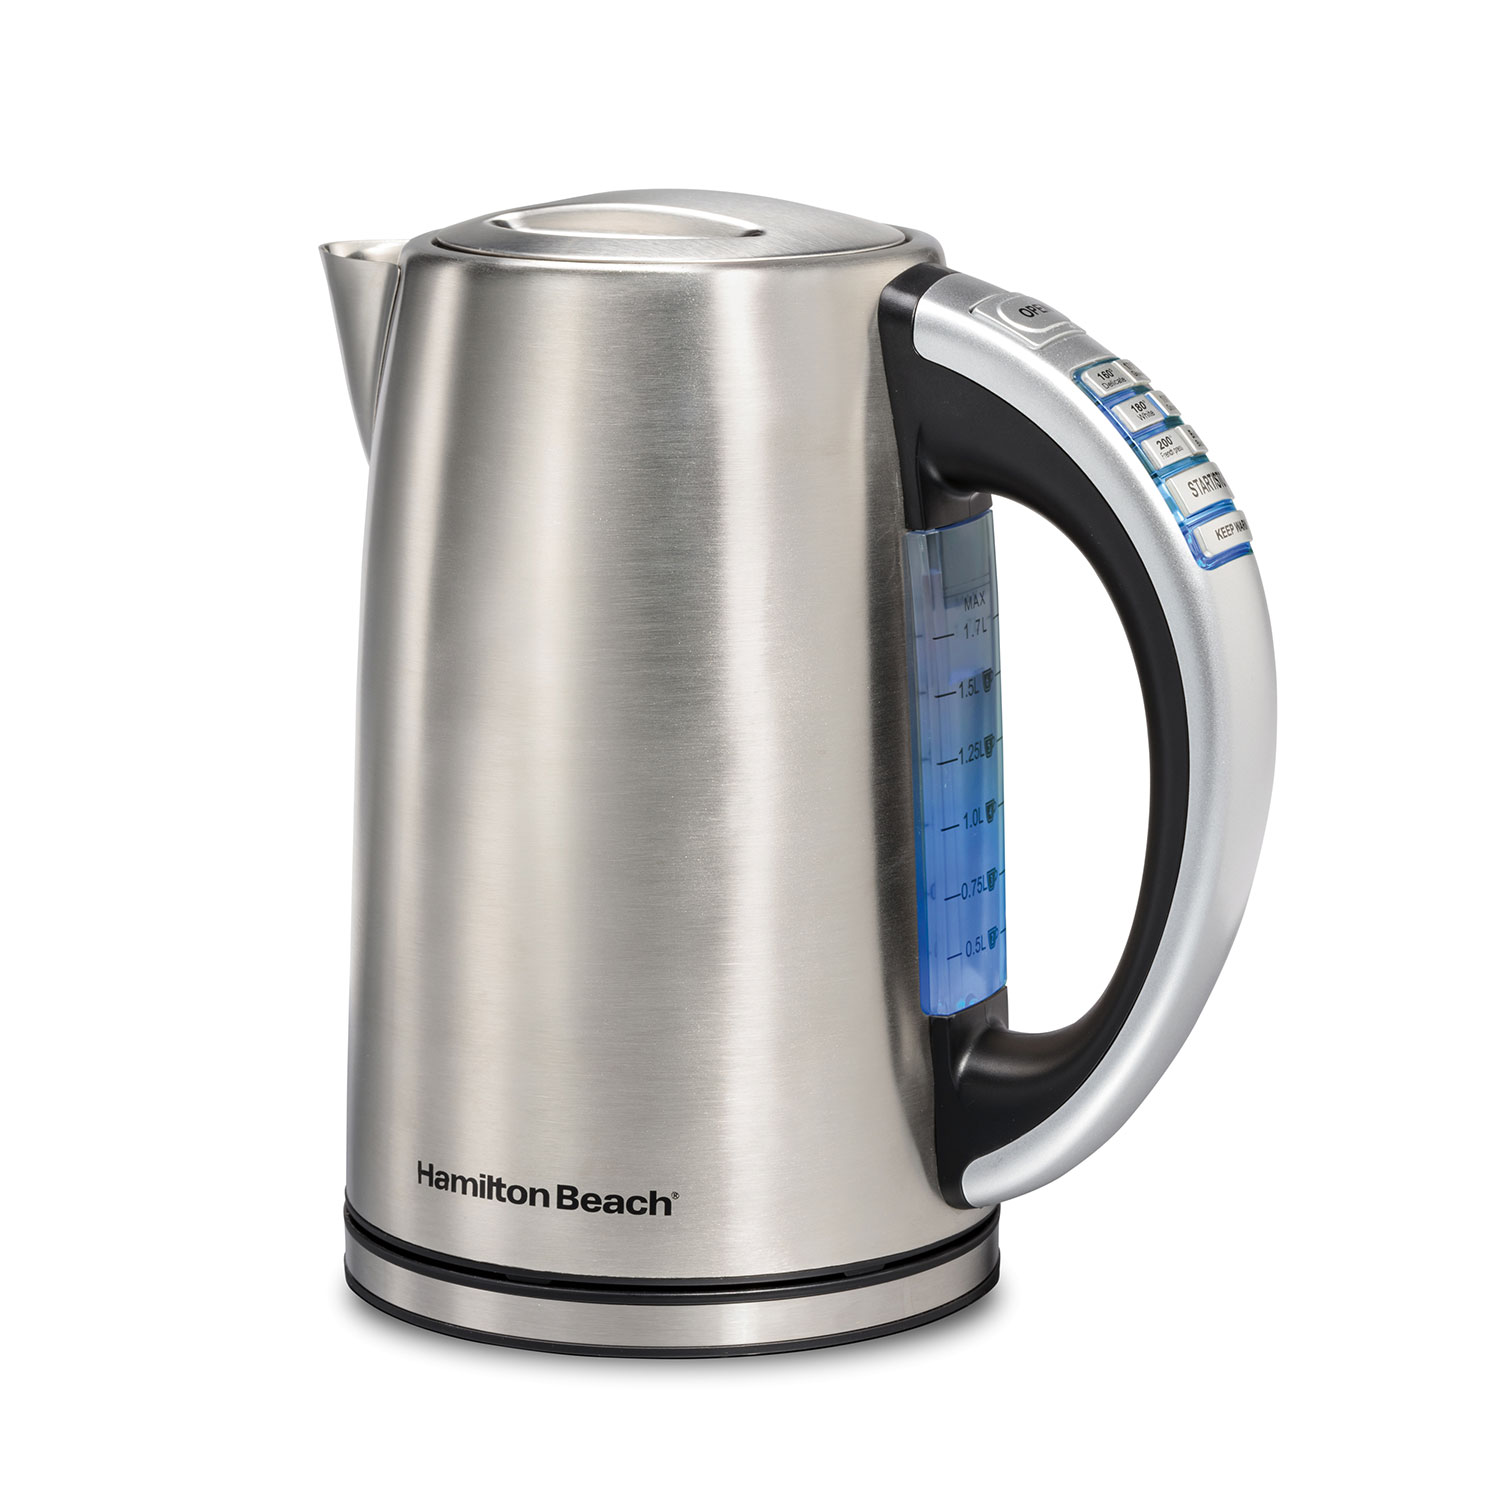 Variable Temperature Electric Kettle, Stainless Steel (41020R)